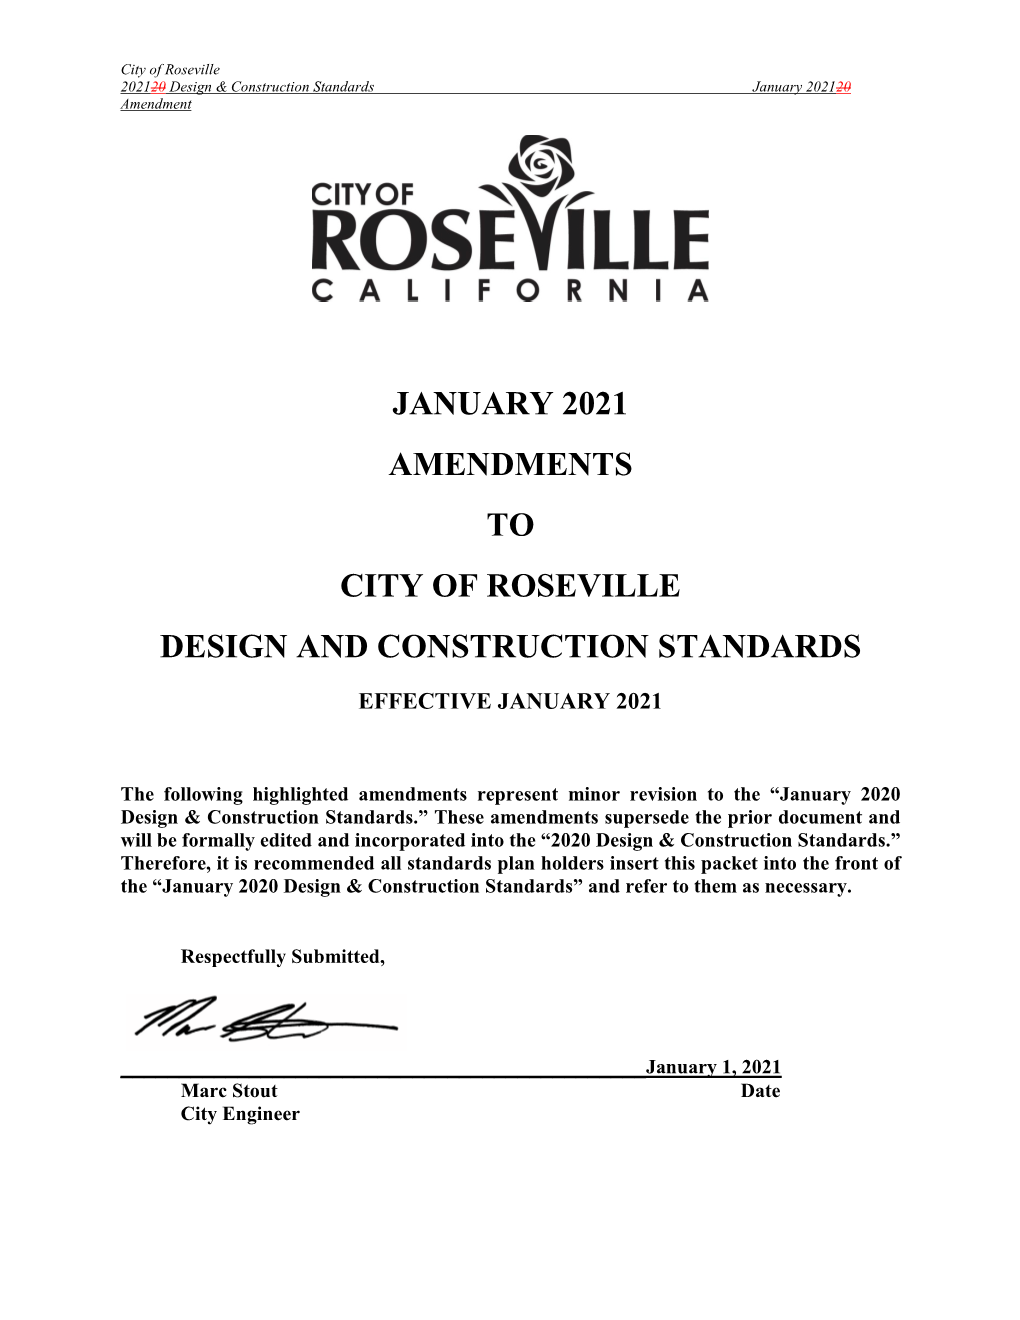 January 2021 Amendments to City of Roseville Design and Construction Standards